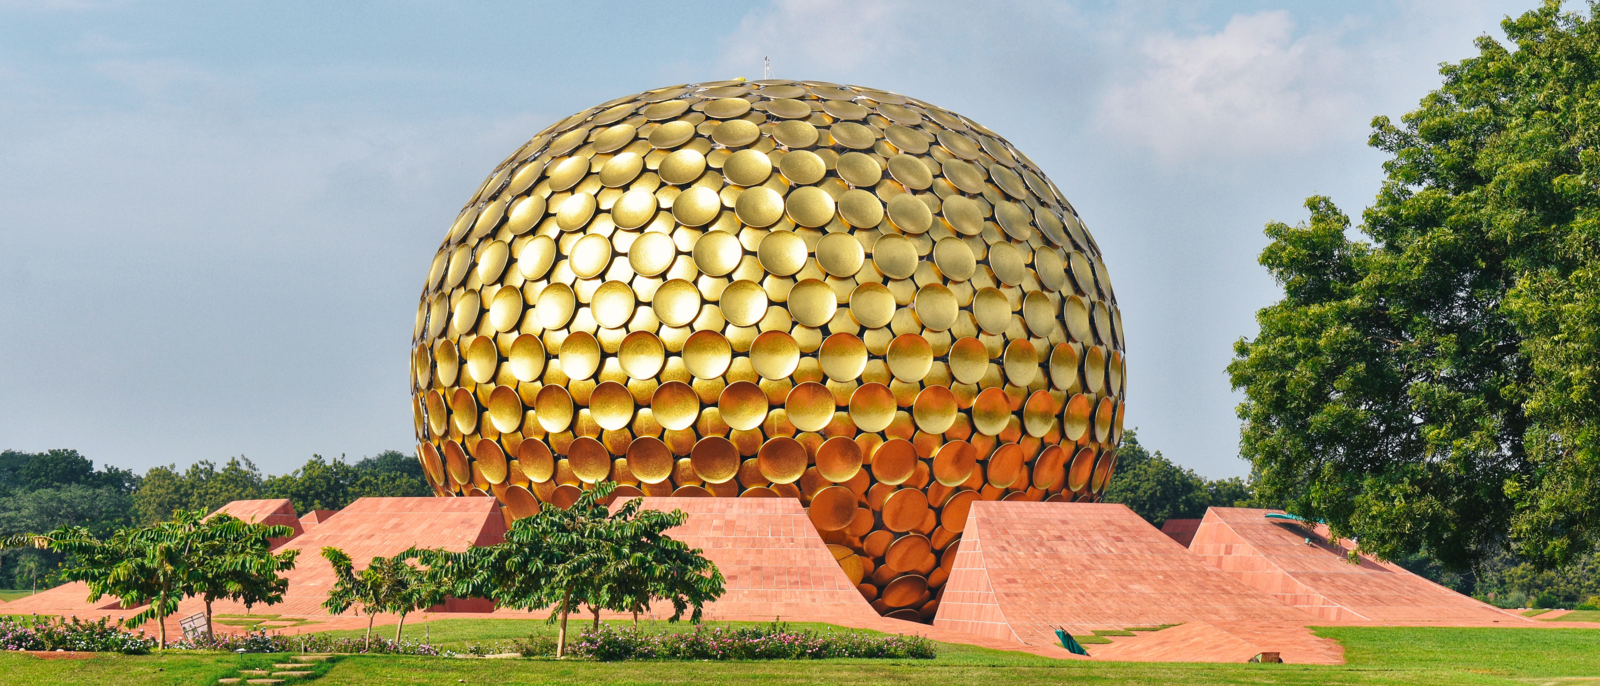 The Matrimandir is an edifice of spiritual significance for practitioners of Integral yoga, in the centre of Auroville established by The Mother of the Sri Aurobindo Ashram, in Auroville near Pondicherry in India